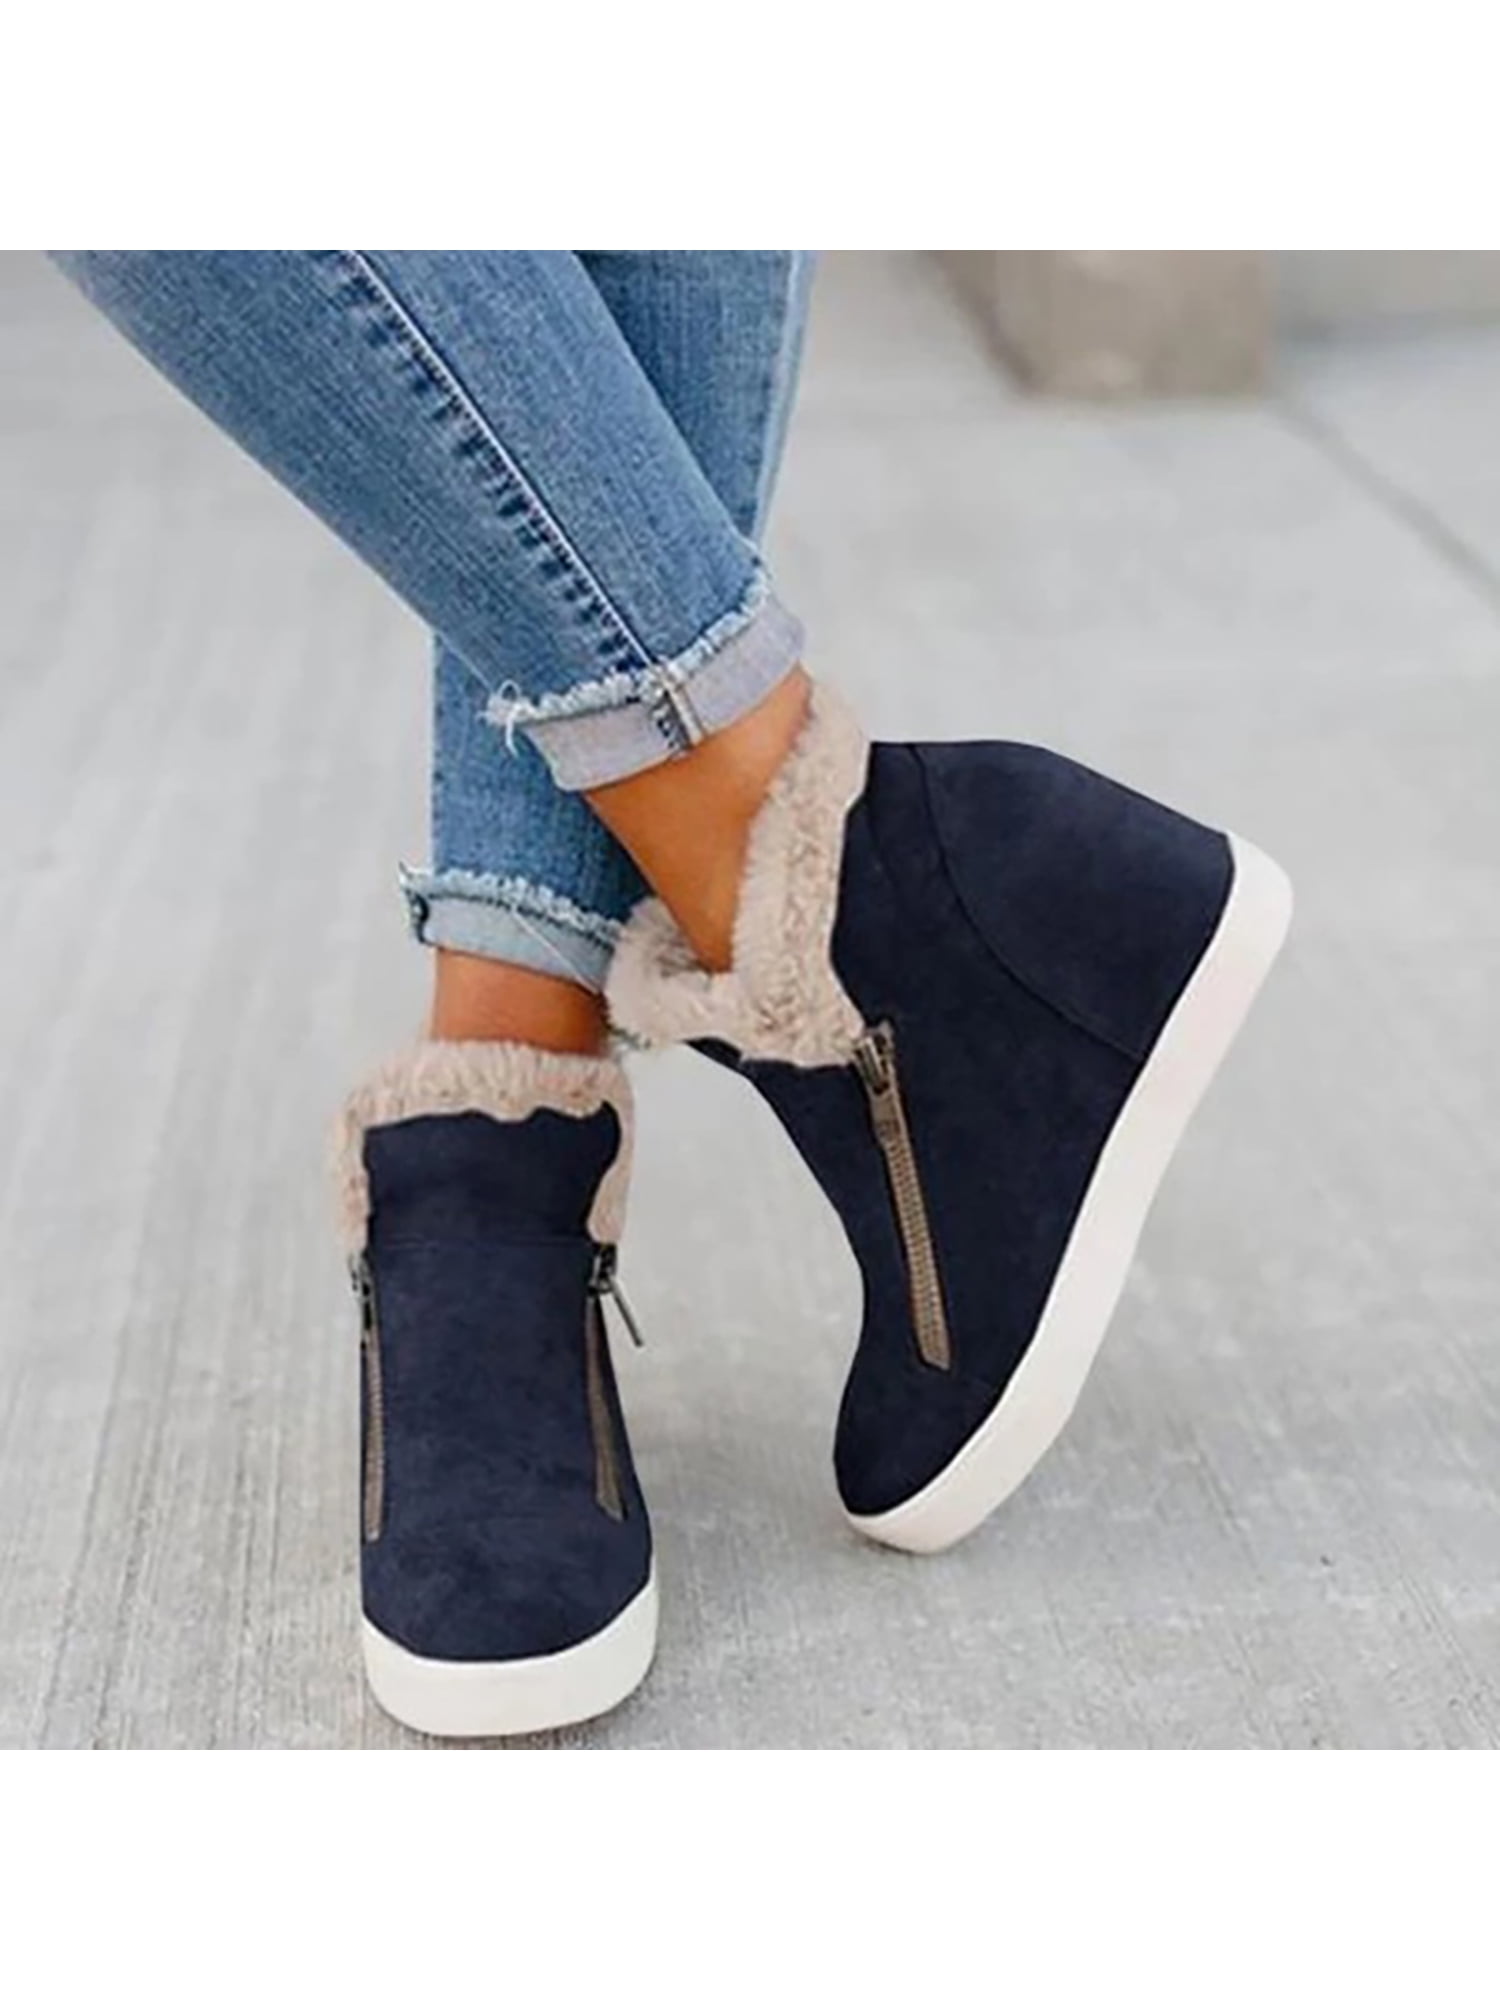 Womens Fur Lined Lace Up Warm Snow Ankle Boots Non slip Casual Wedge Heel Shoes